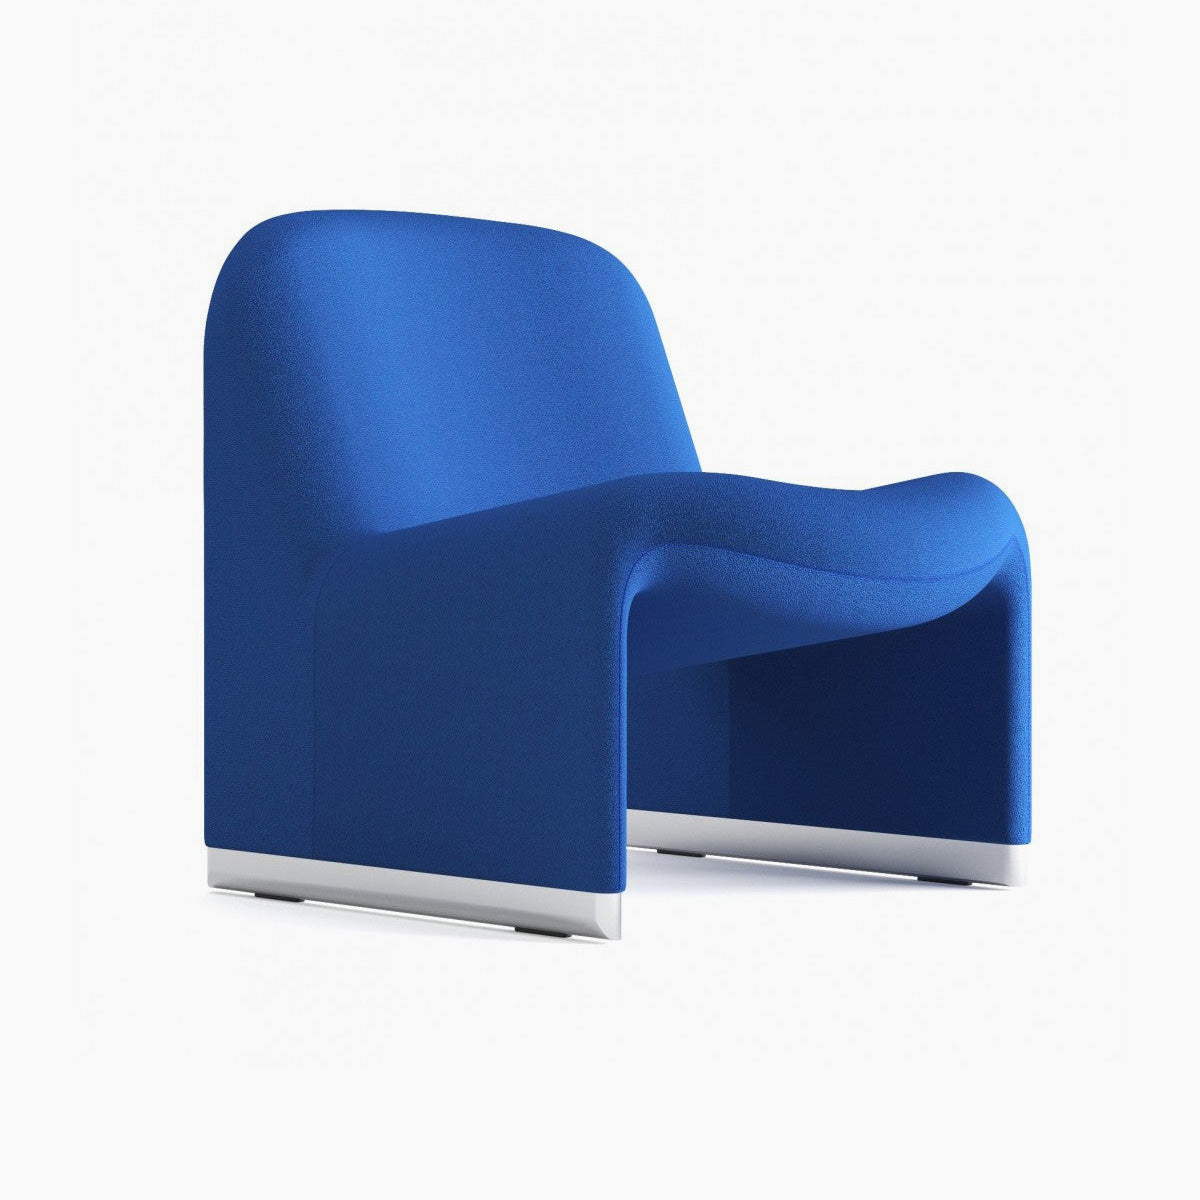 Alky Chair - Official